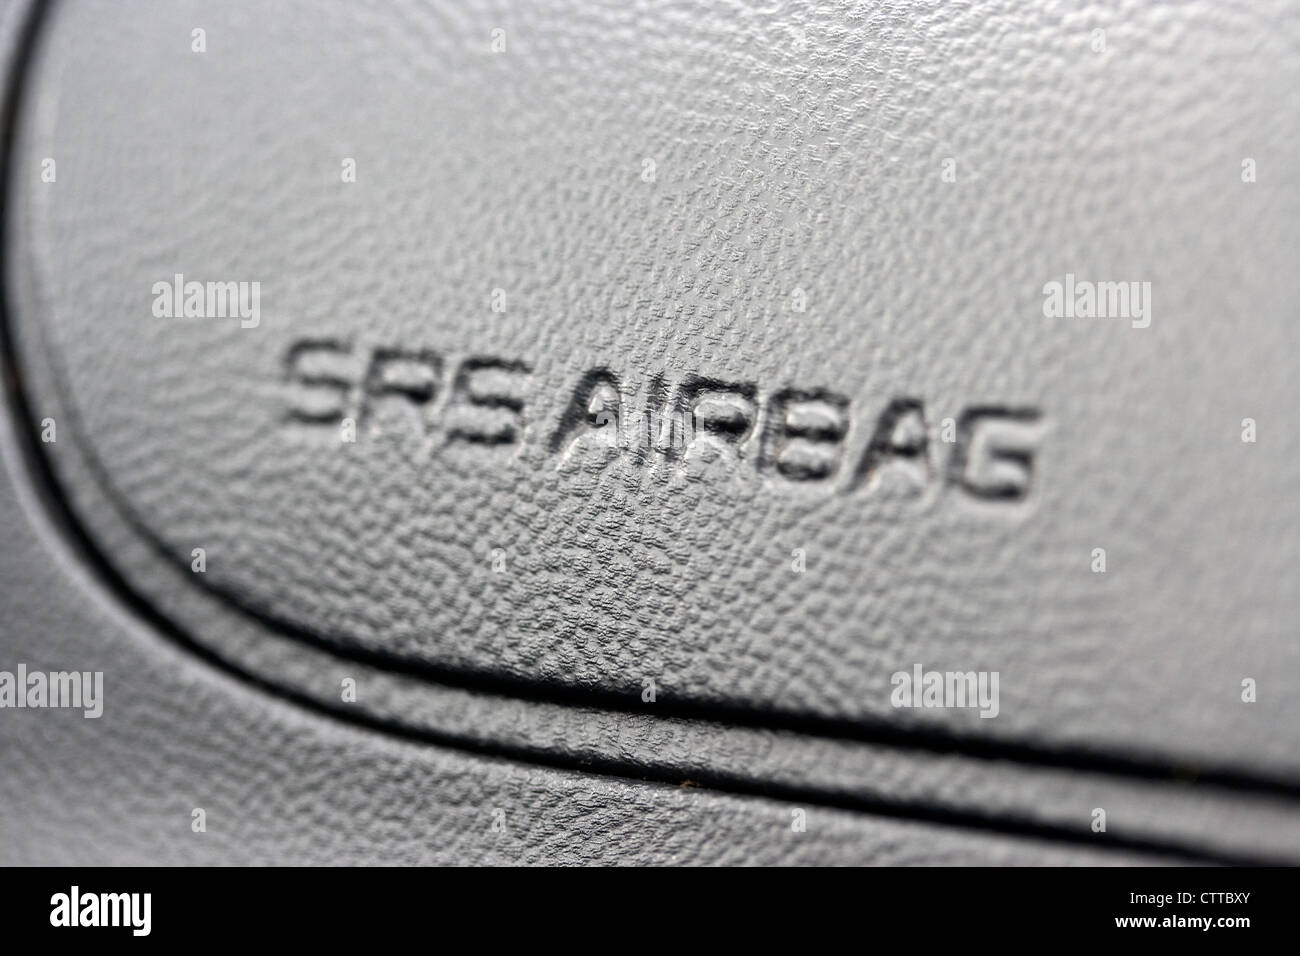 srs airbag built into a car dashboard Stock Photo